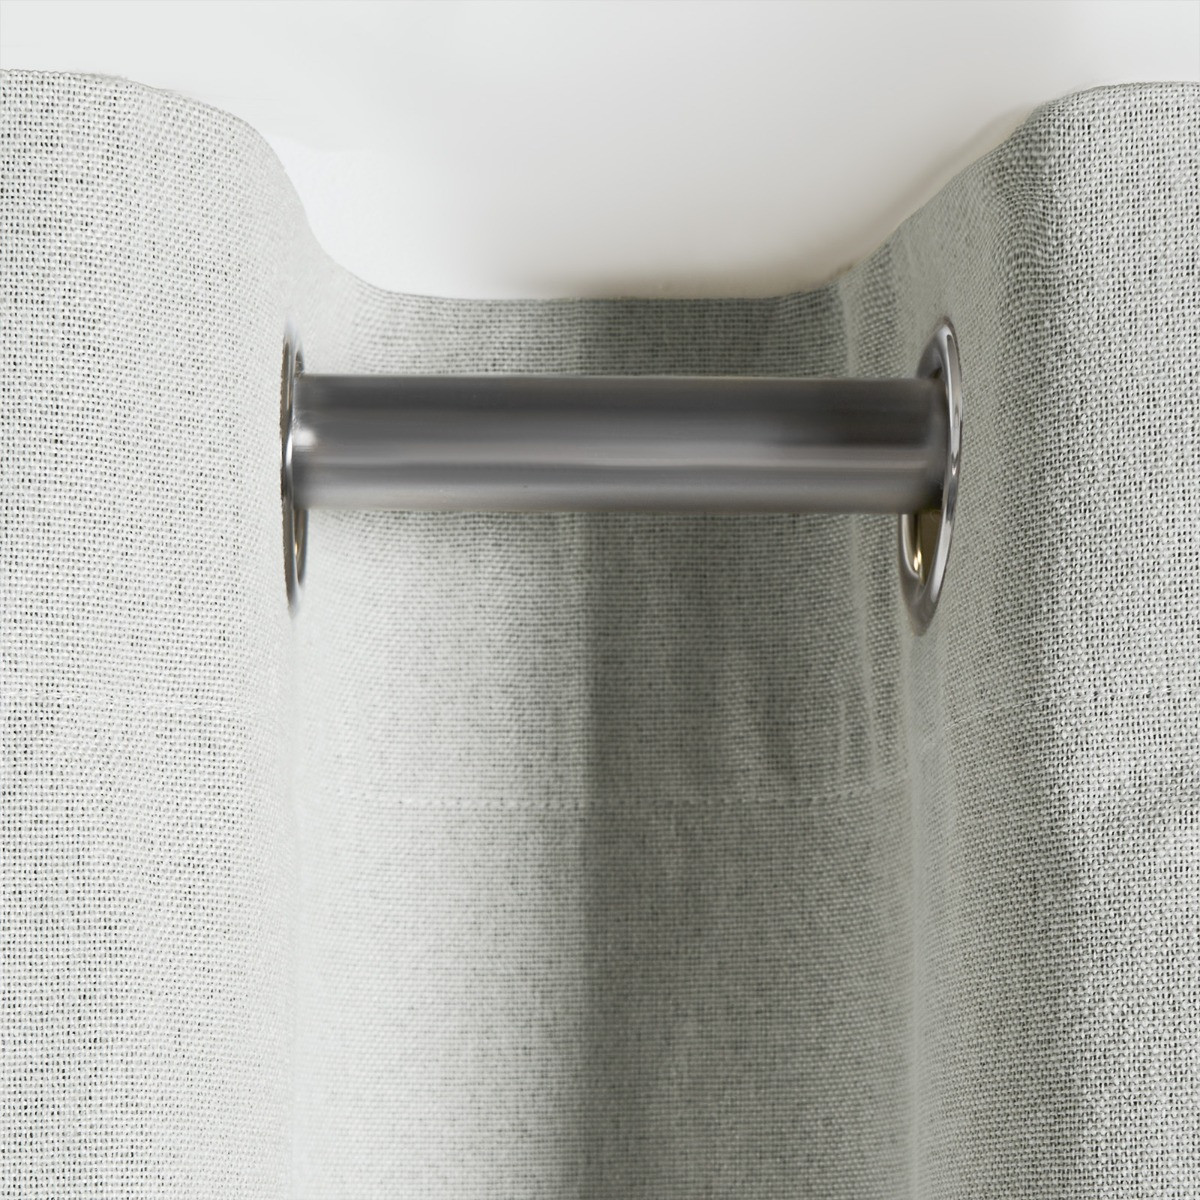 OHS Woven Texture Eyelet Ultra Blackout Curtains - Silver>